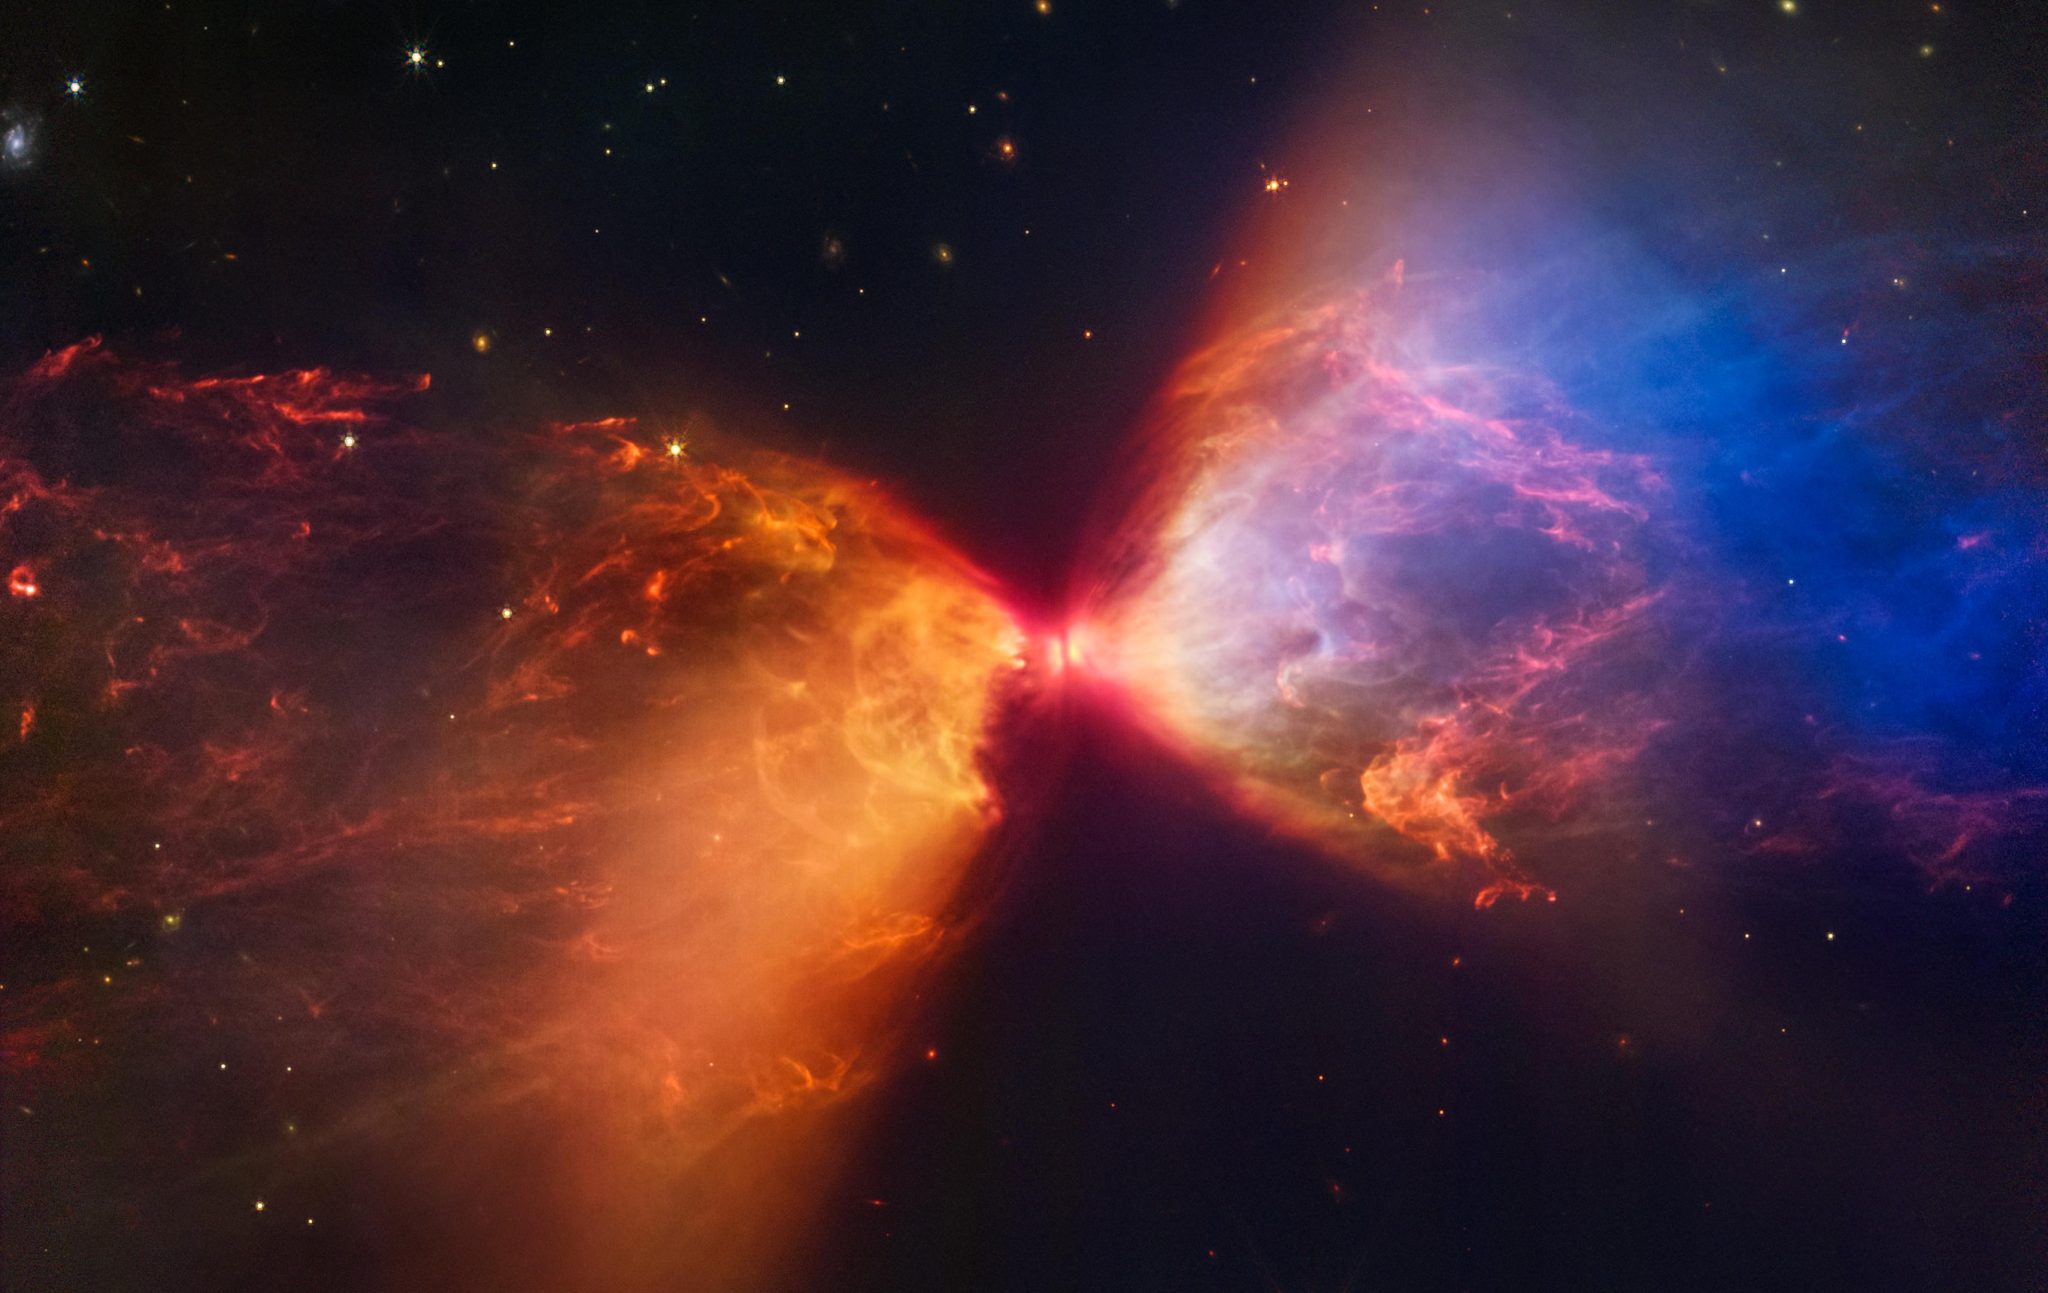 Webb Space Telescope once captures hidden features of a protostar